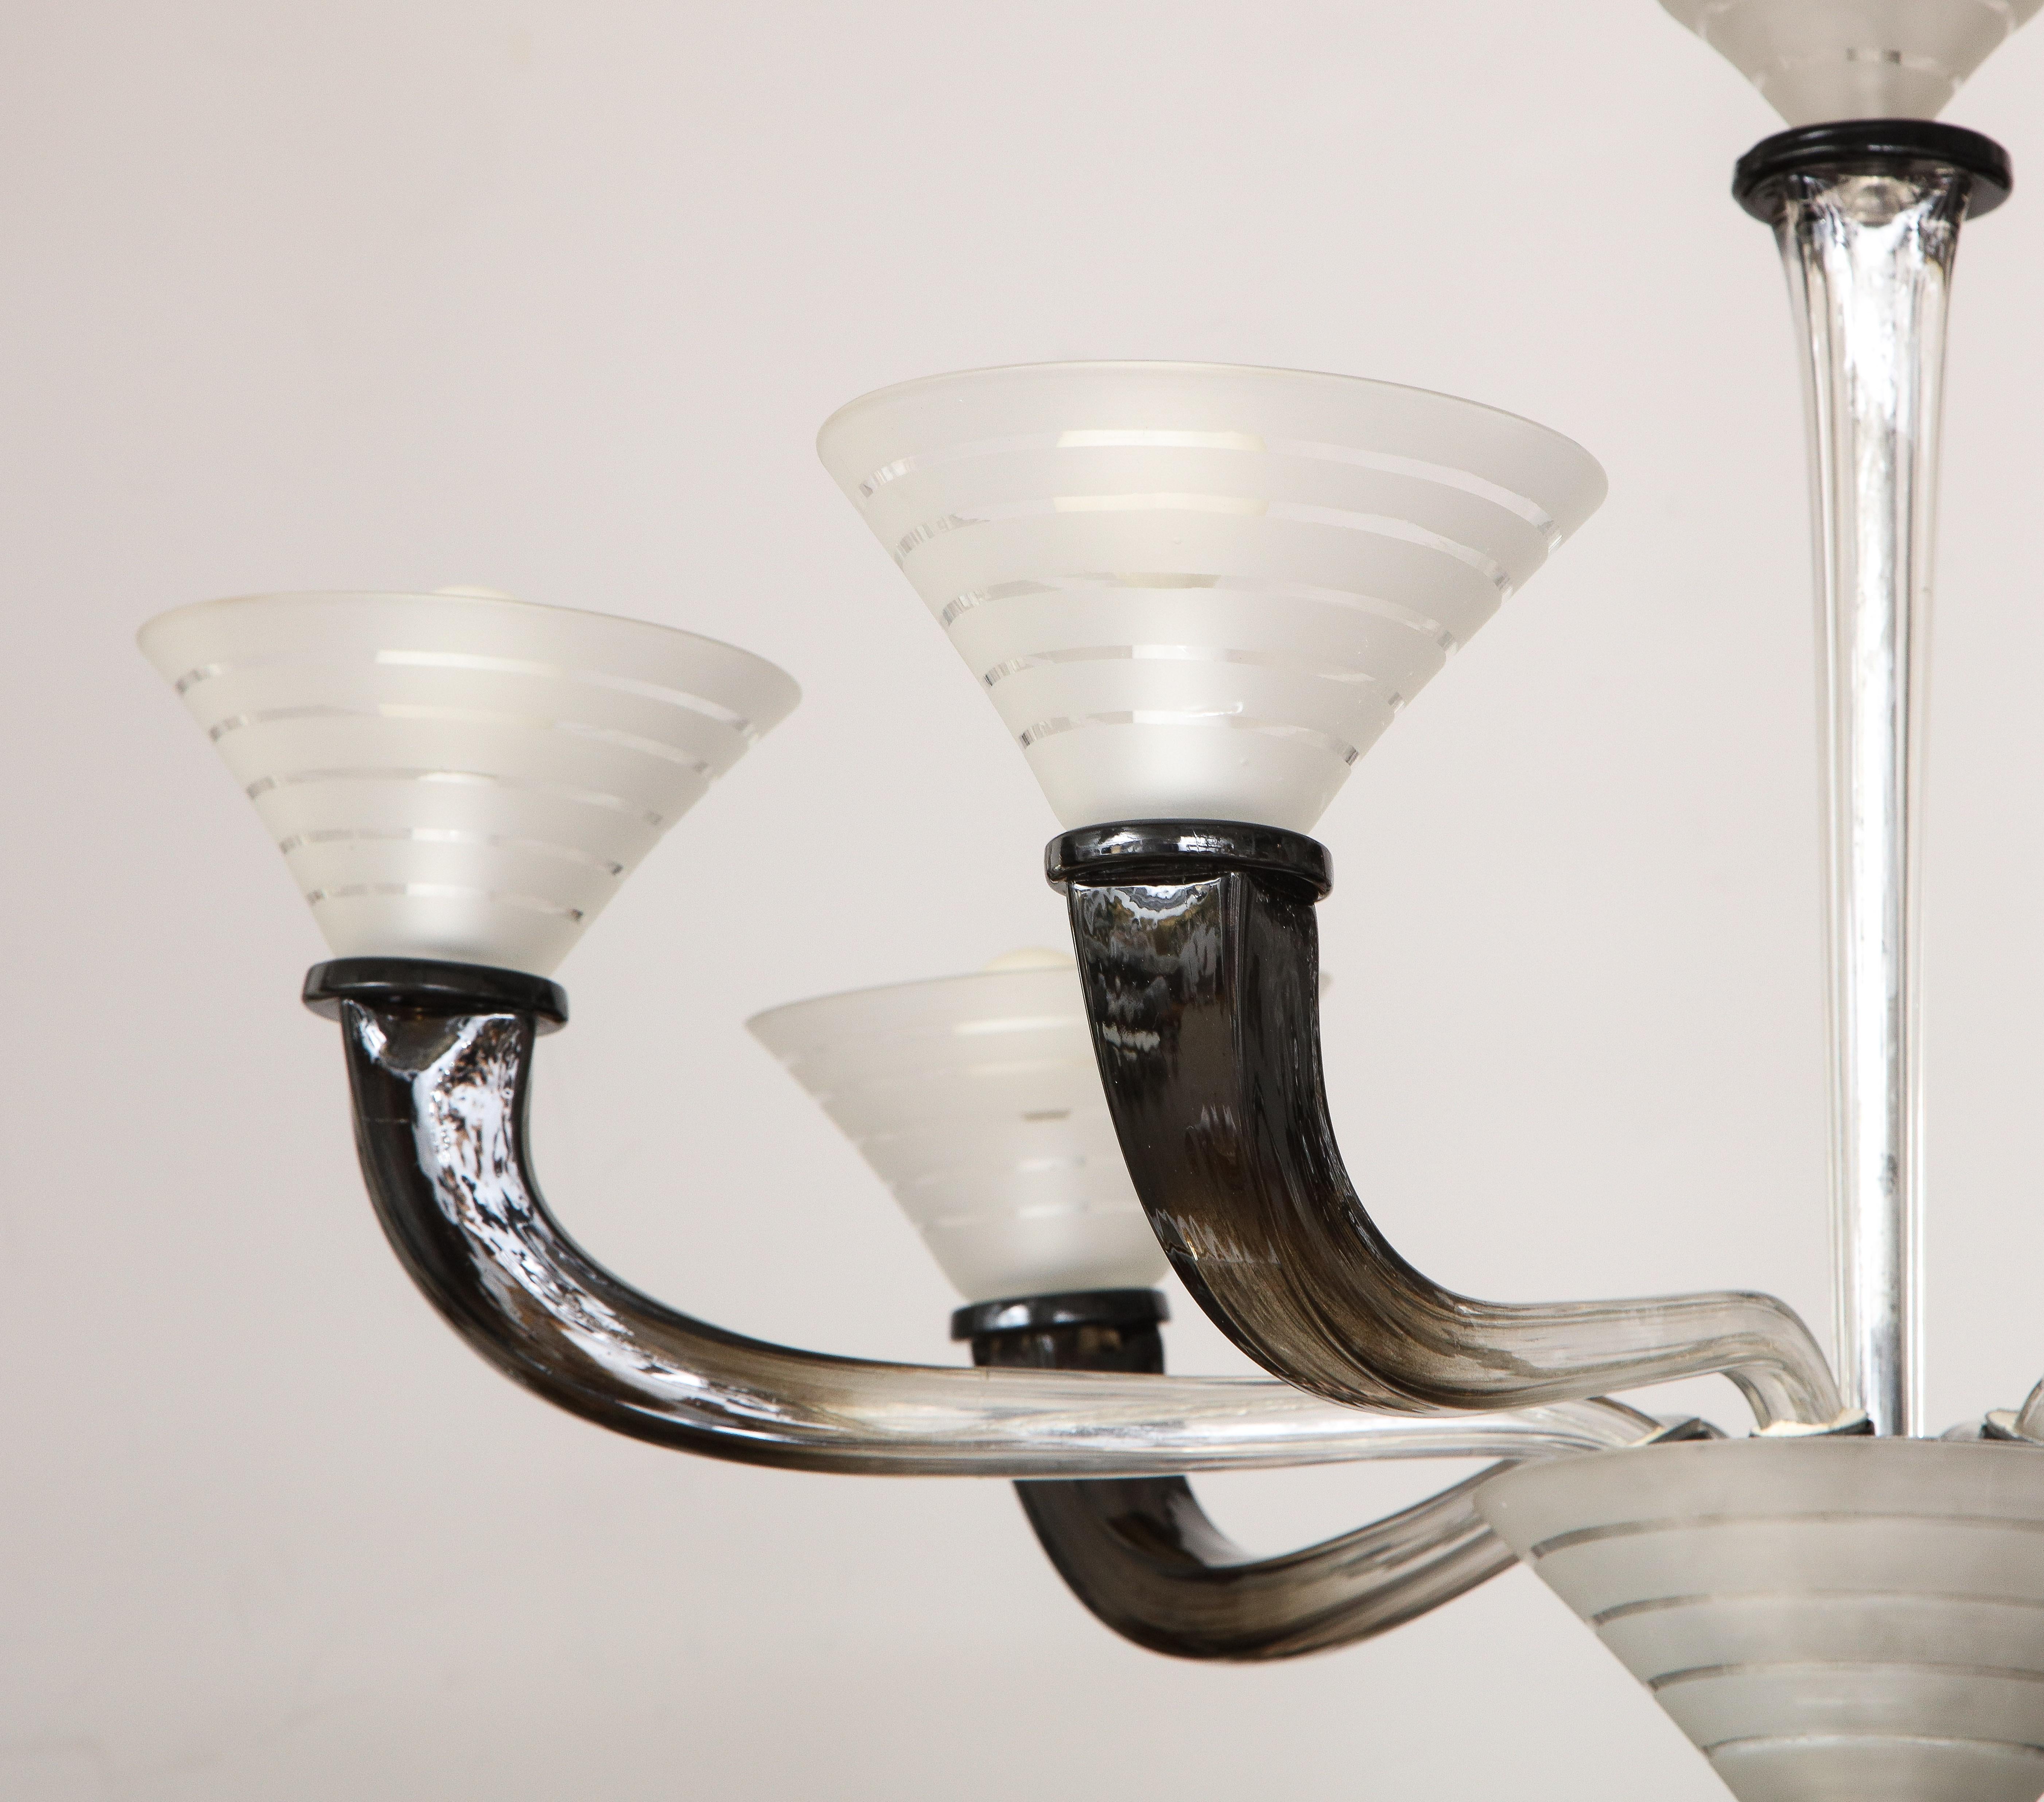 Italian Art Deco Frosted Glass Six Arm Chandelier, circa 1940's For Sale 9